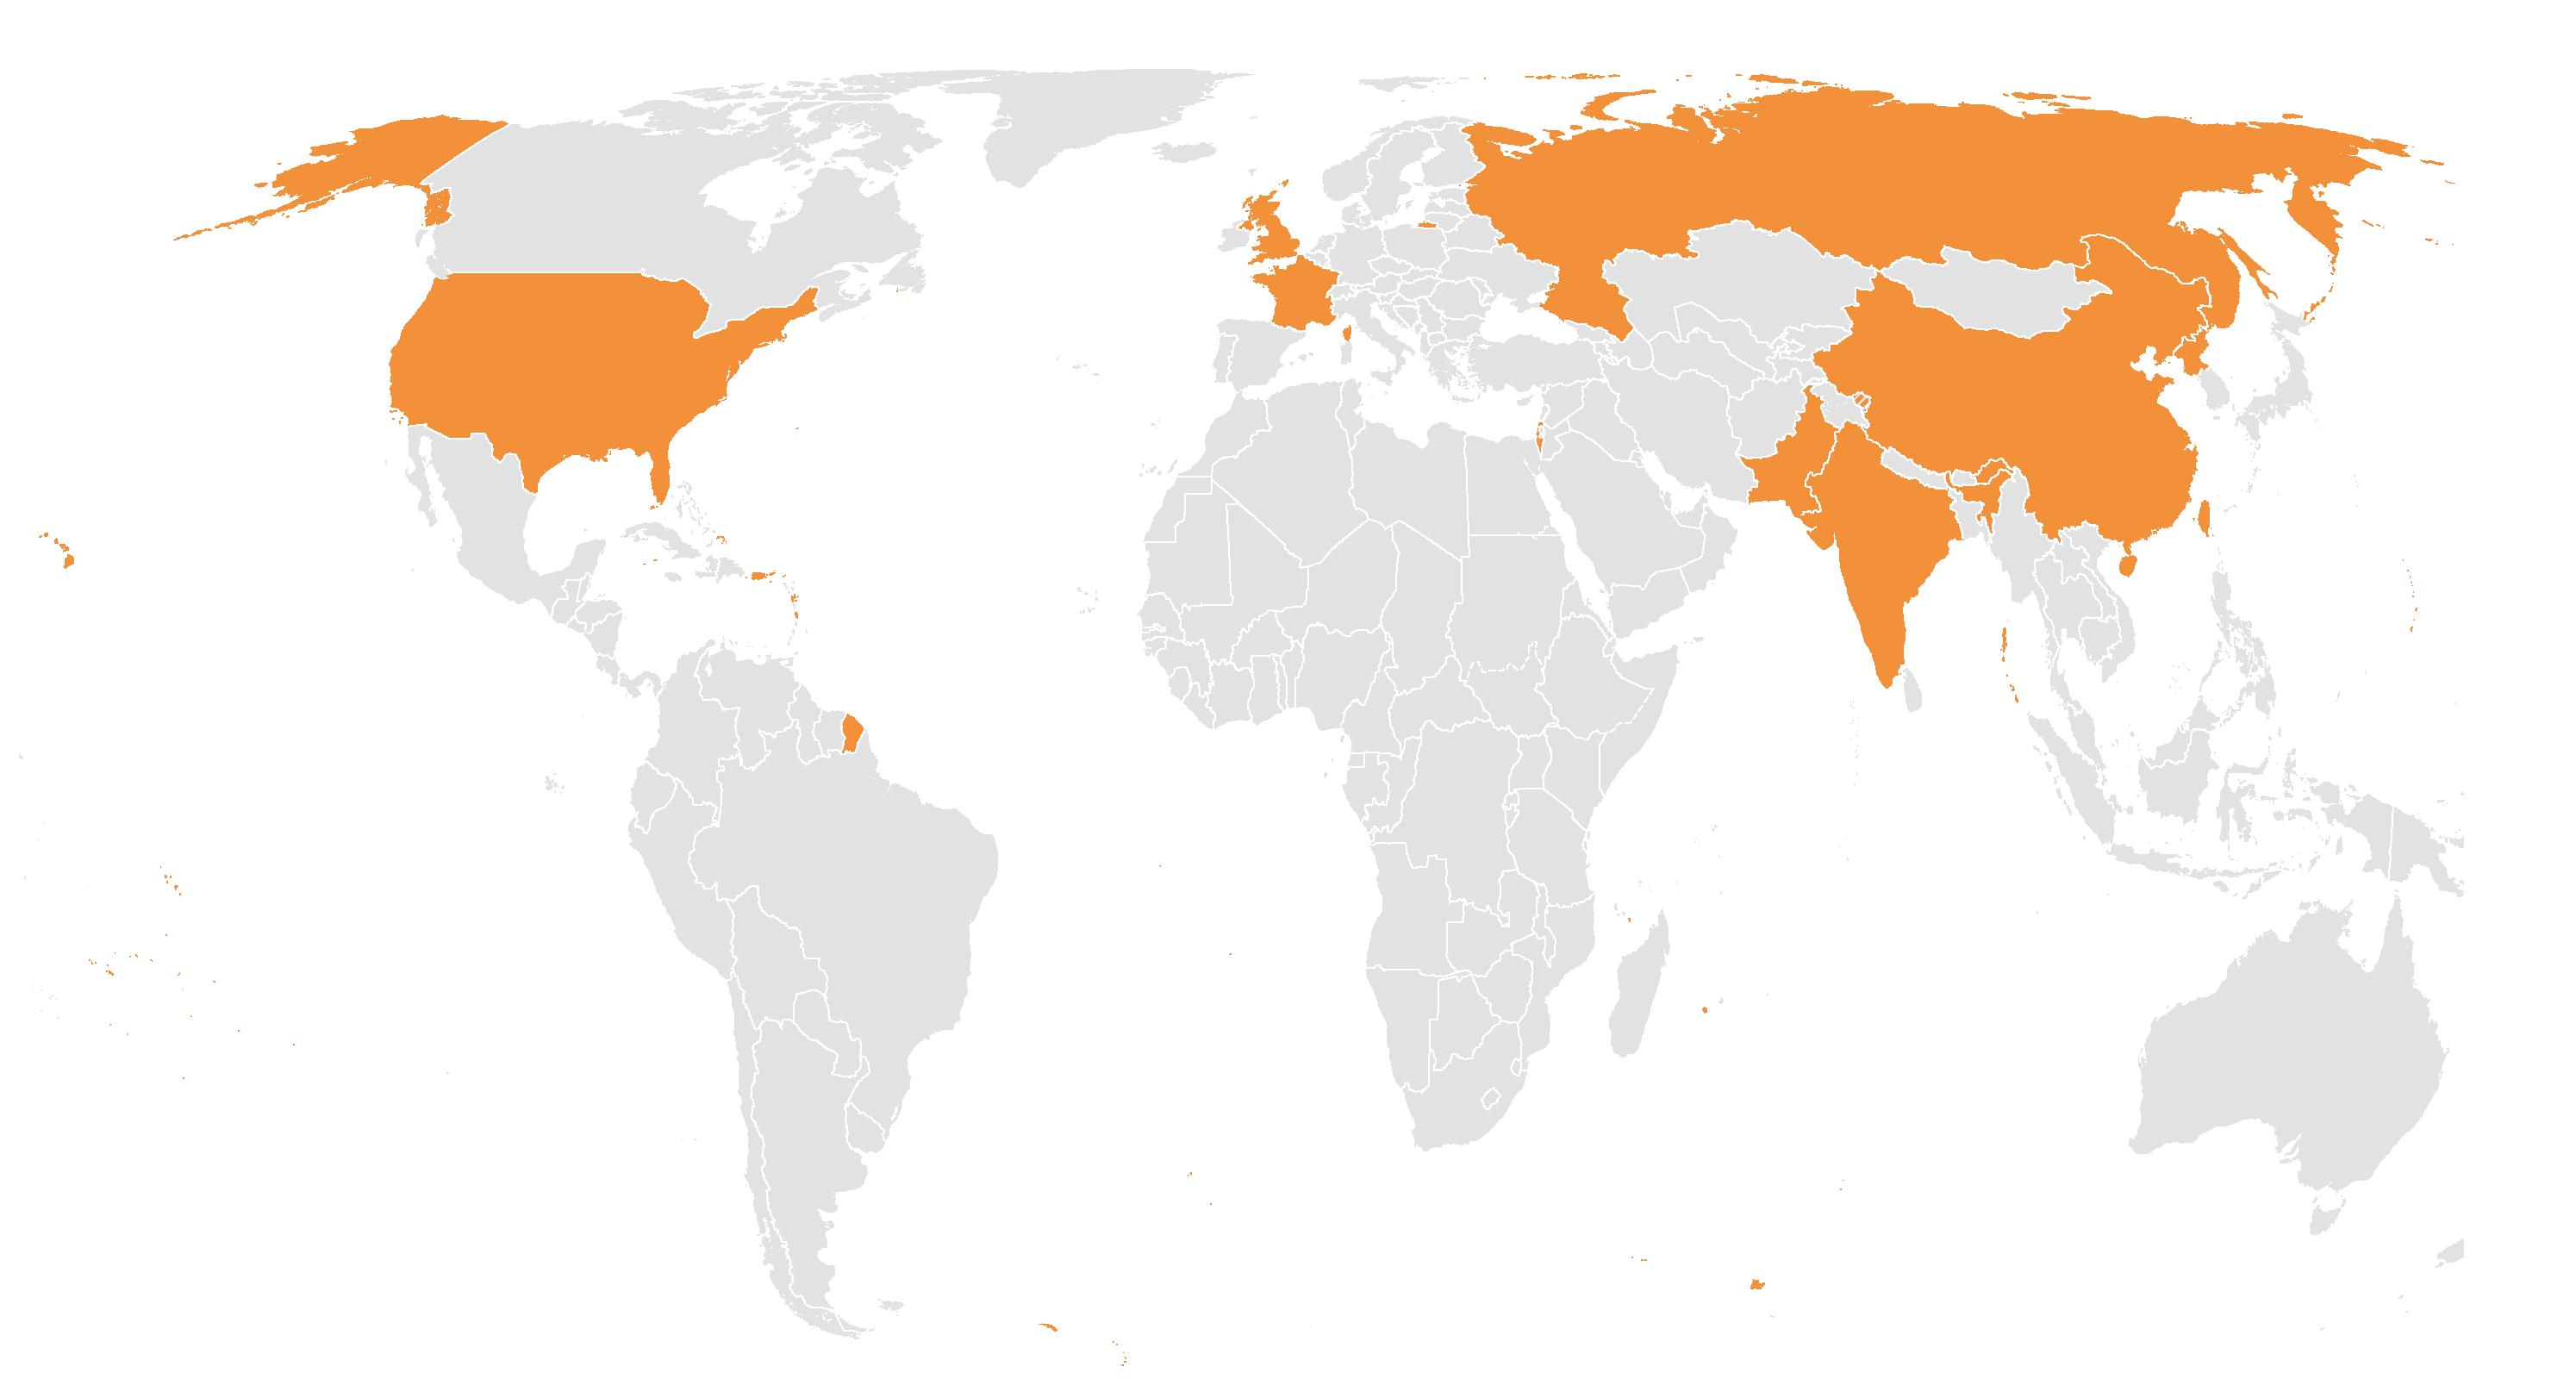 World map highlighting countries with nuclear modernization programmes